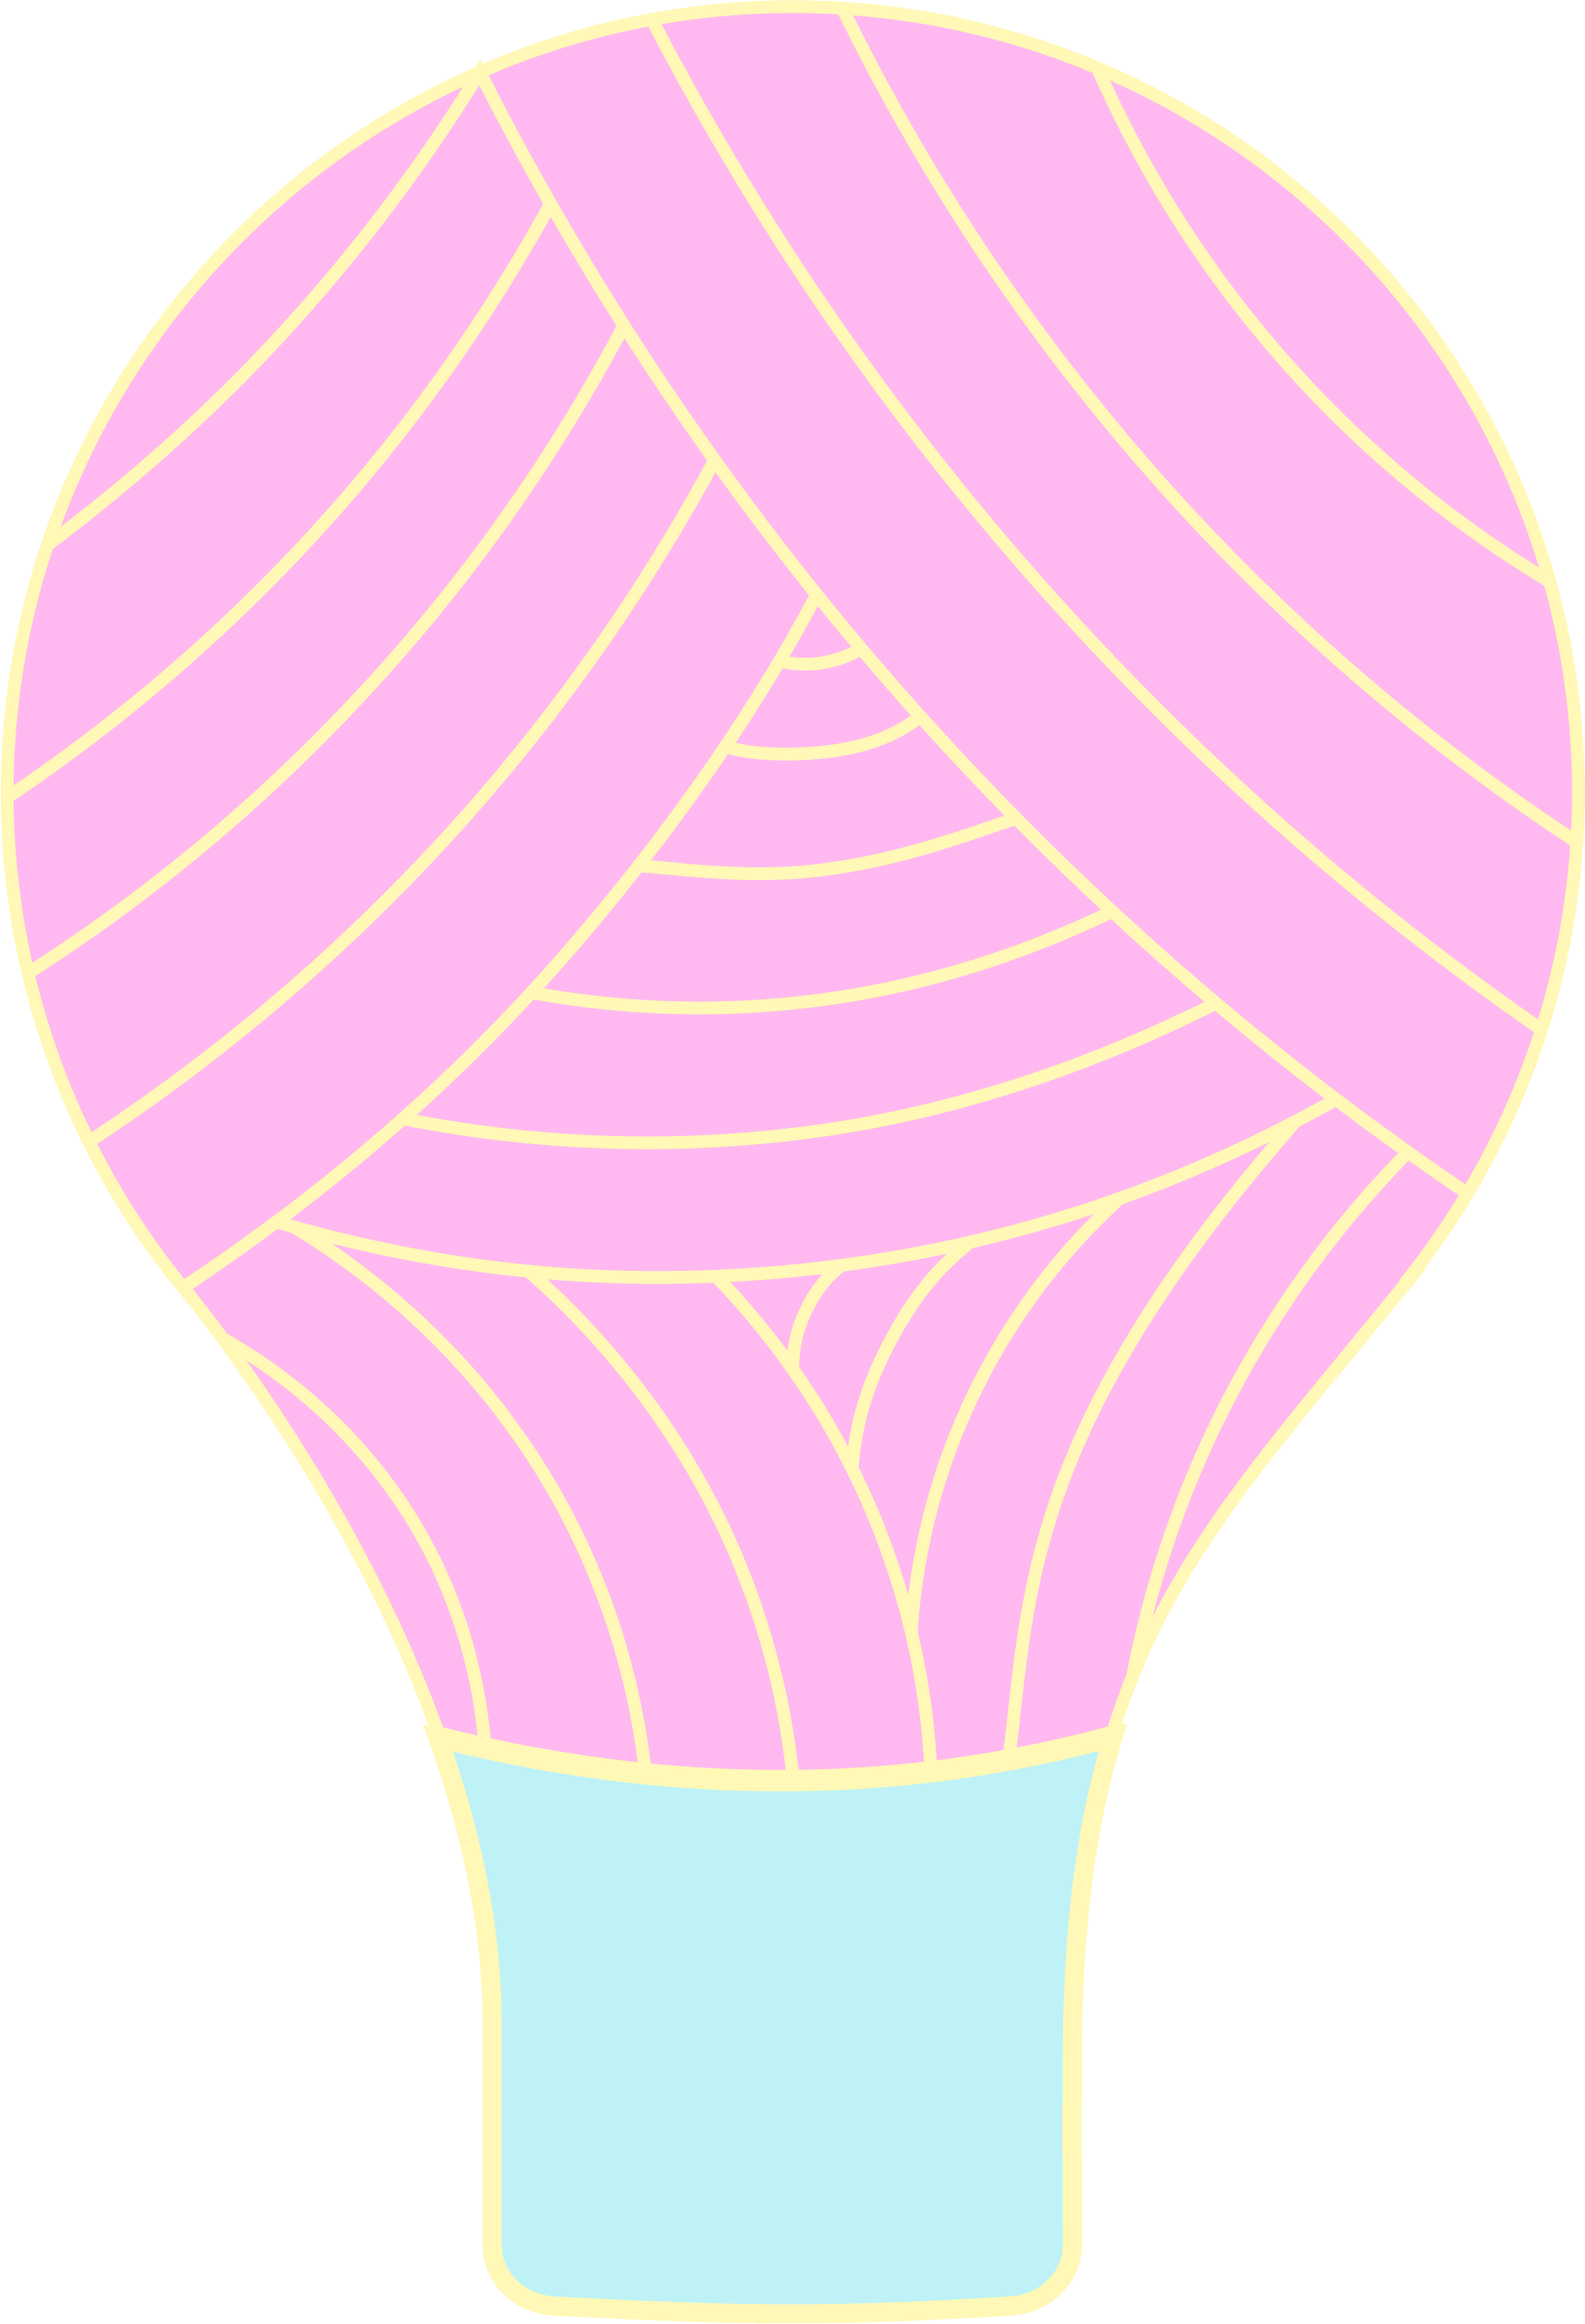 The dora does logo - a graphic of a pink lightbulb which looks like a ball of yarn.